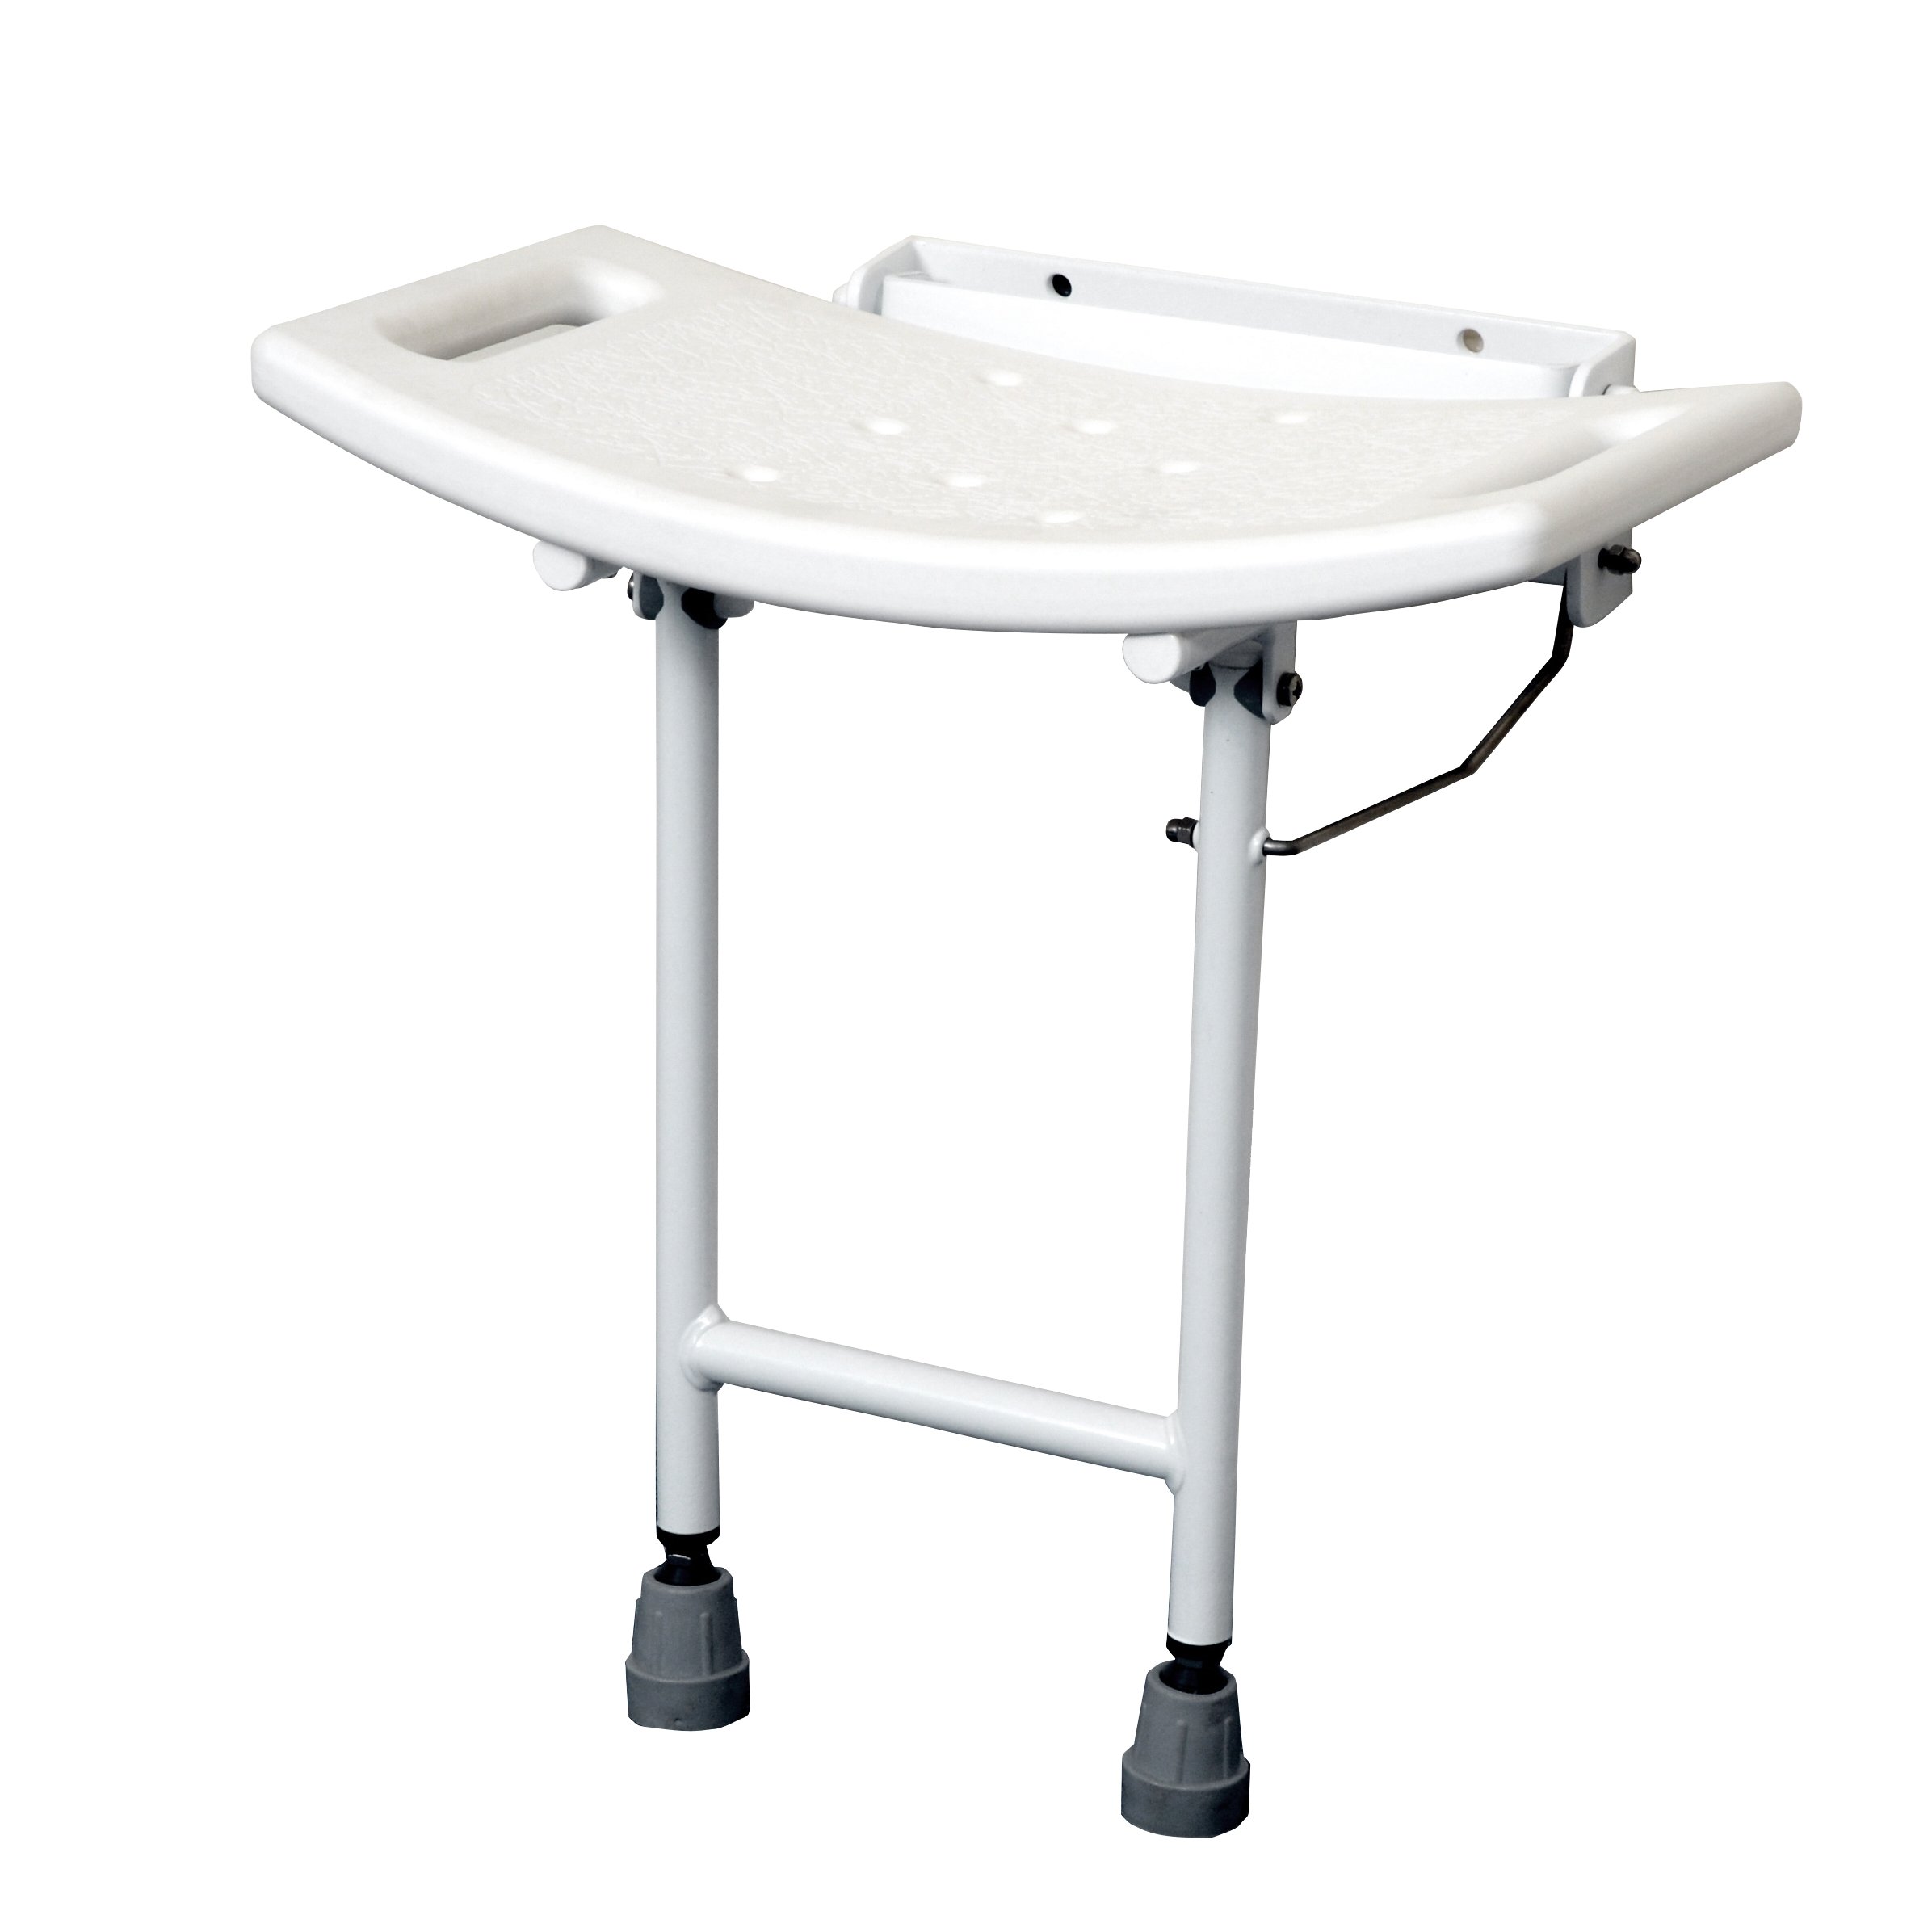 Lift up Moulded Shower Seat With legs 1